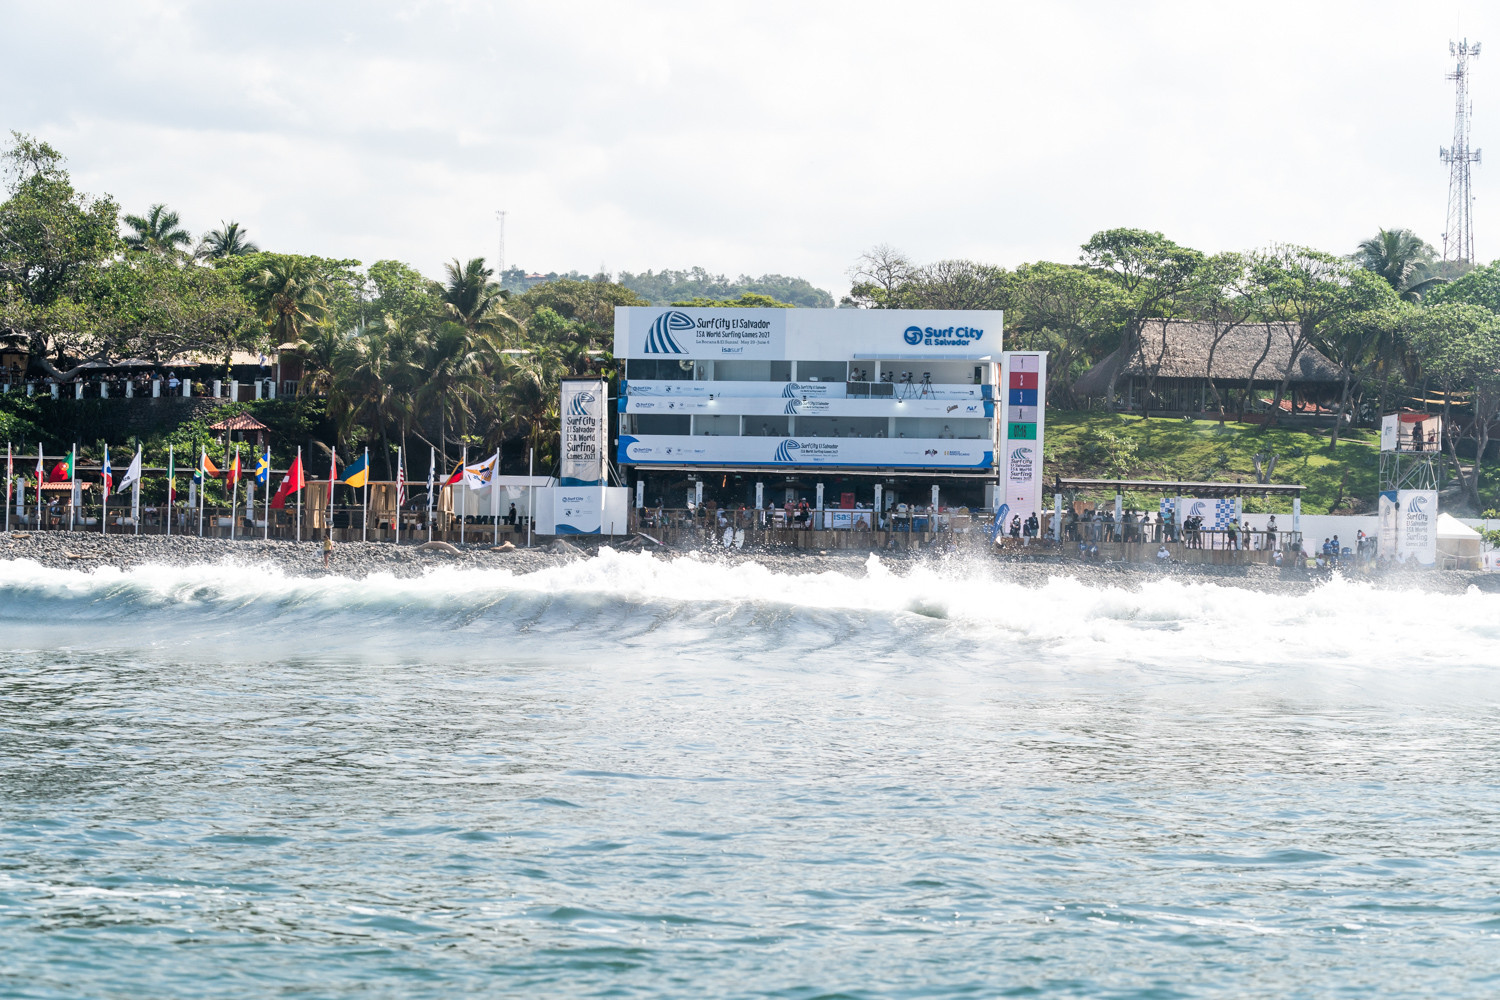 This year's World Surfing Games, described by ISA President Fernando Aguerre as the best in the event's history, were held at Surf City in El Salvador ©ISA/Sean Evans